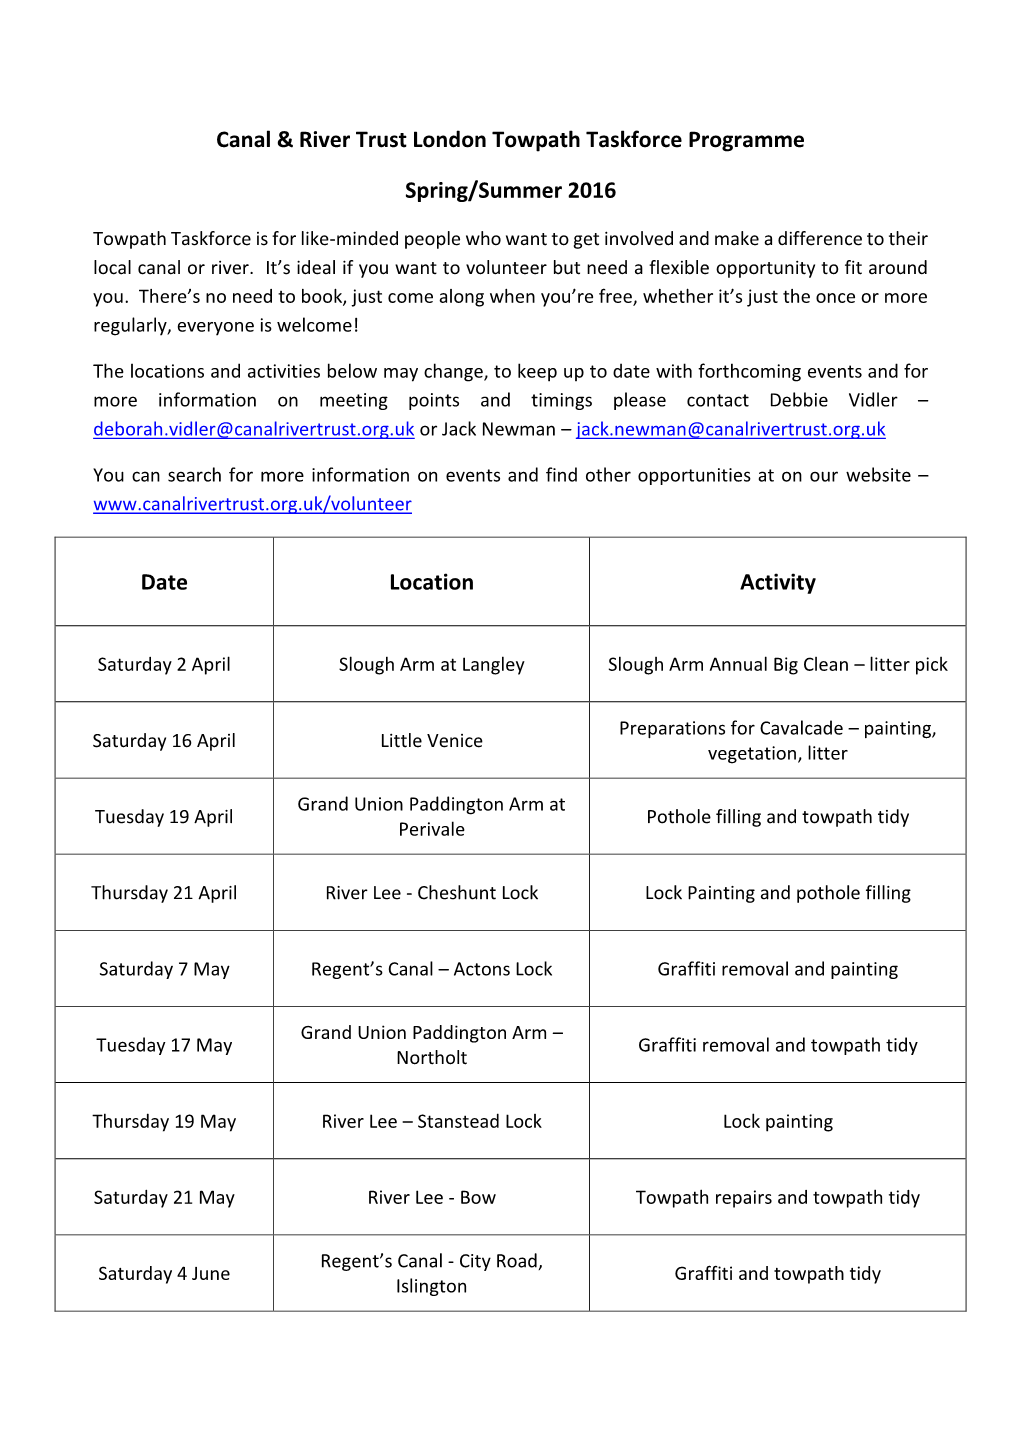 Canal & River Trust London Towpath Taskforce Programme Spring/Summer 2016 Date Location Activity